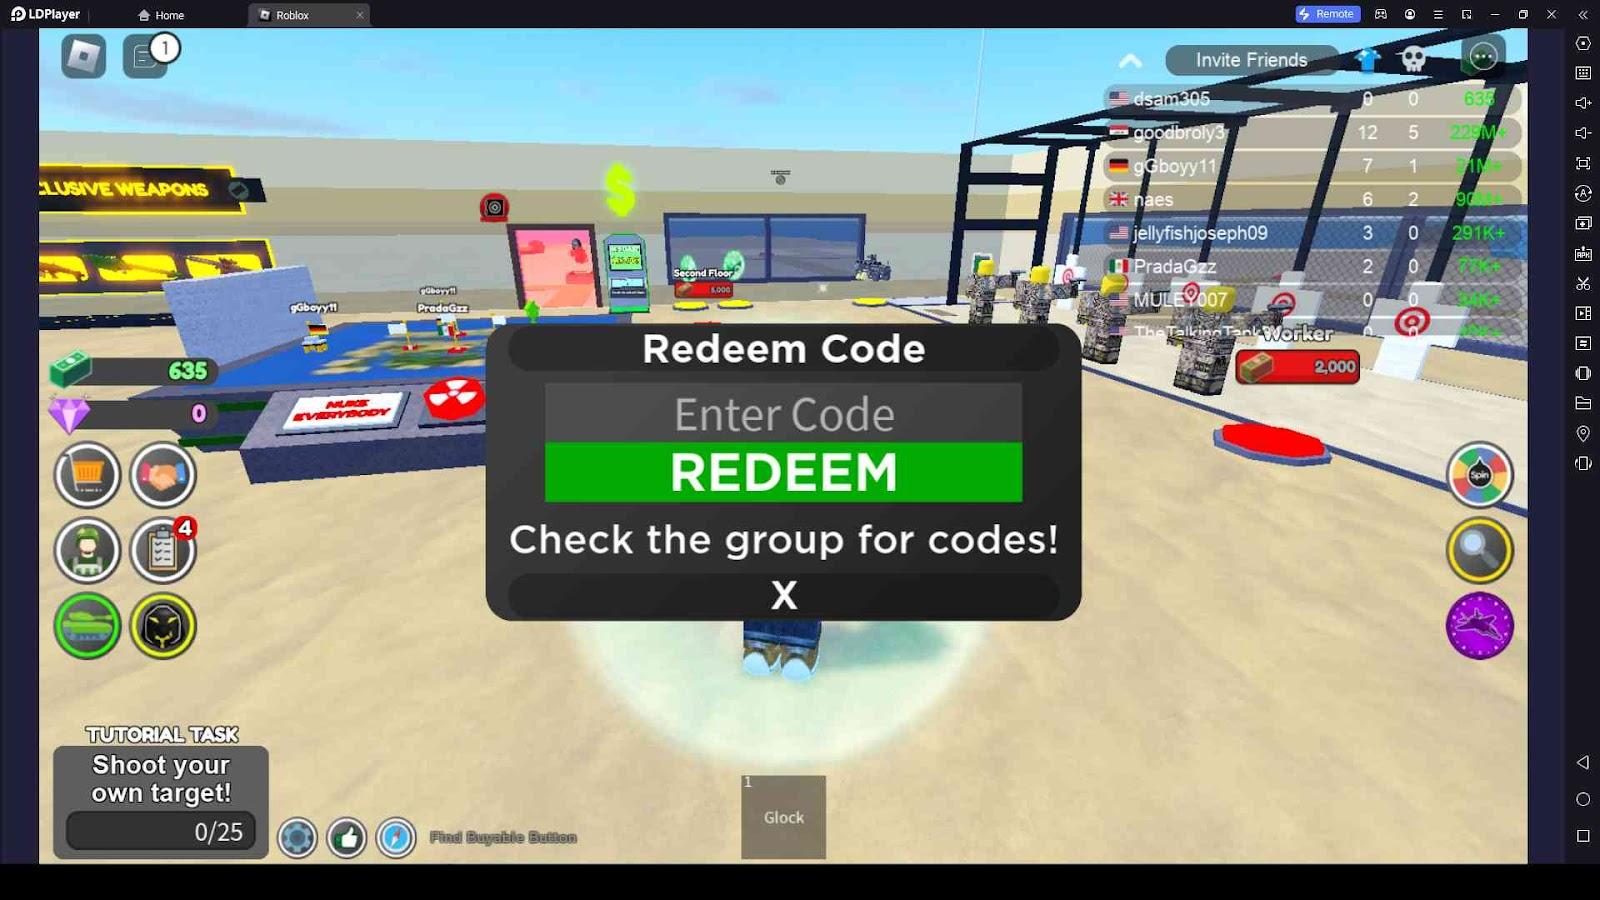 Roblox Military War Tycoon Codes (December 2023)